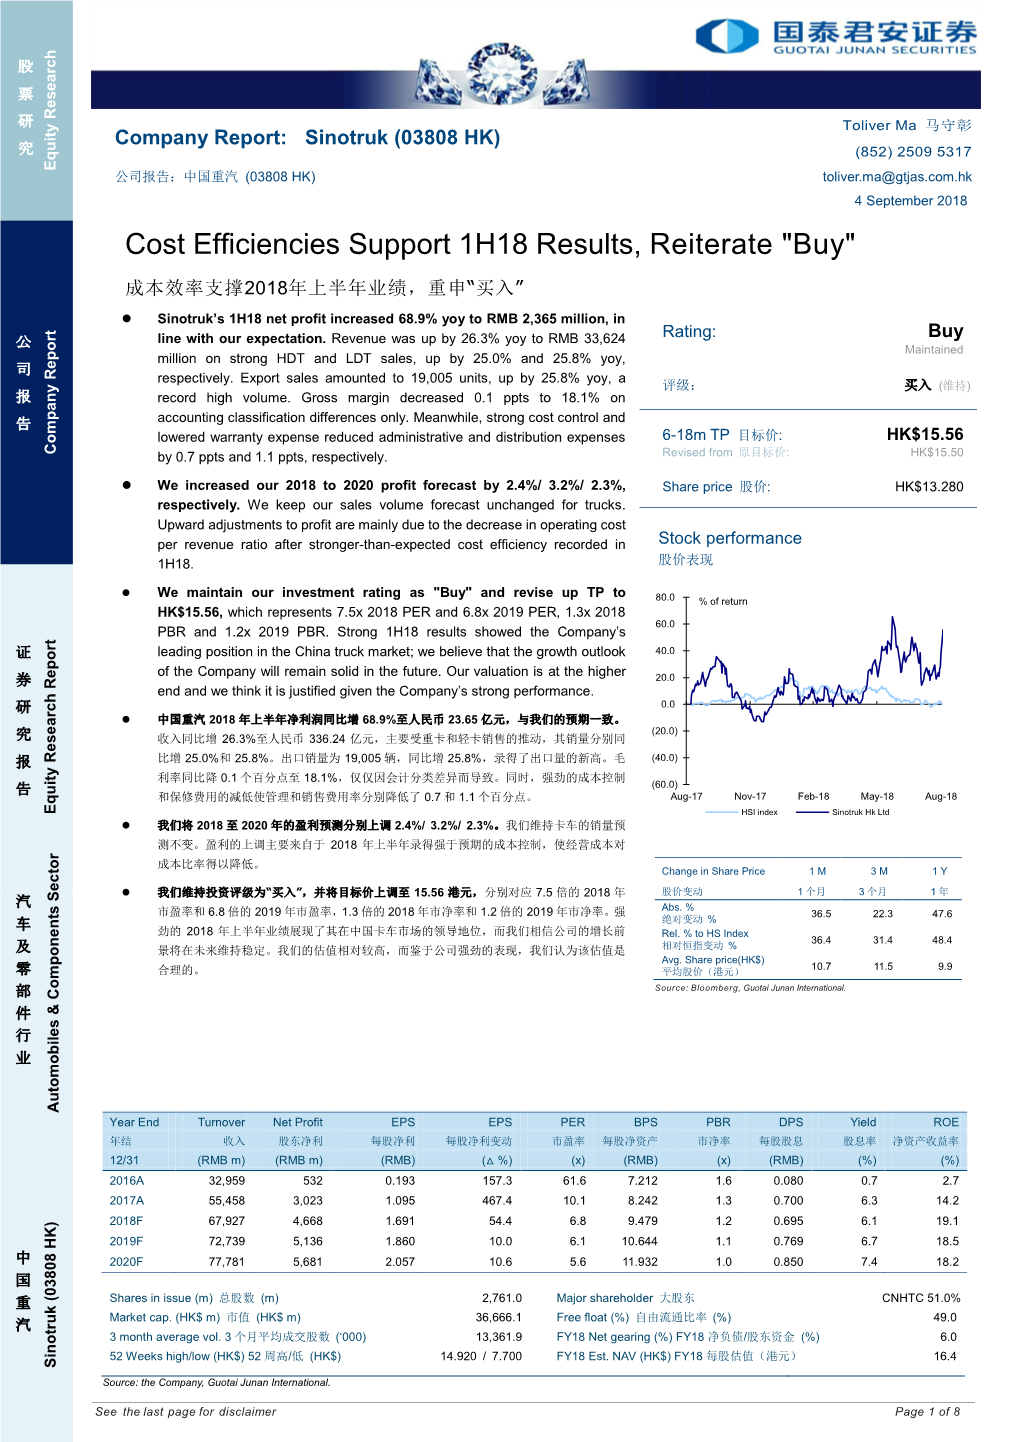 Cost Efficiencies Support 1H18 Results, Reiterate "Buy" 成本效率支撑2018年上半年业绩，重申“买入”